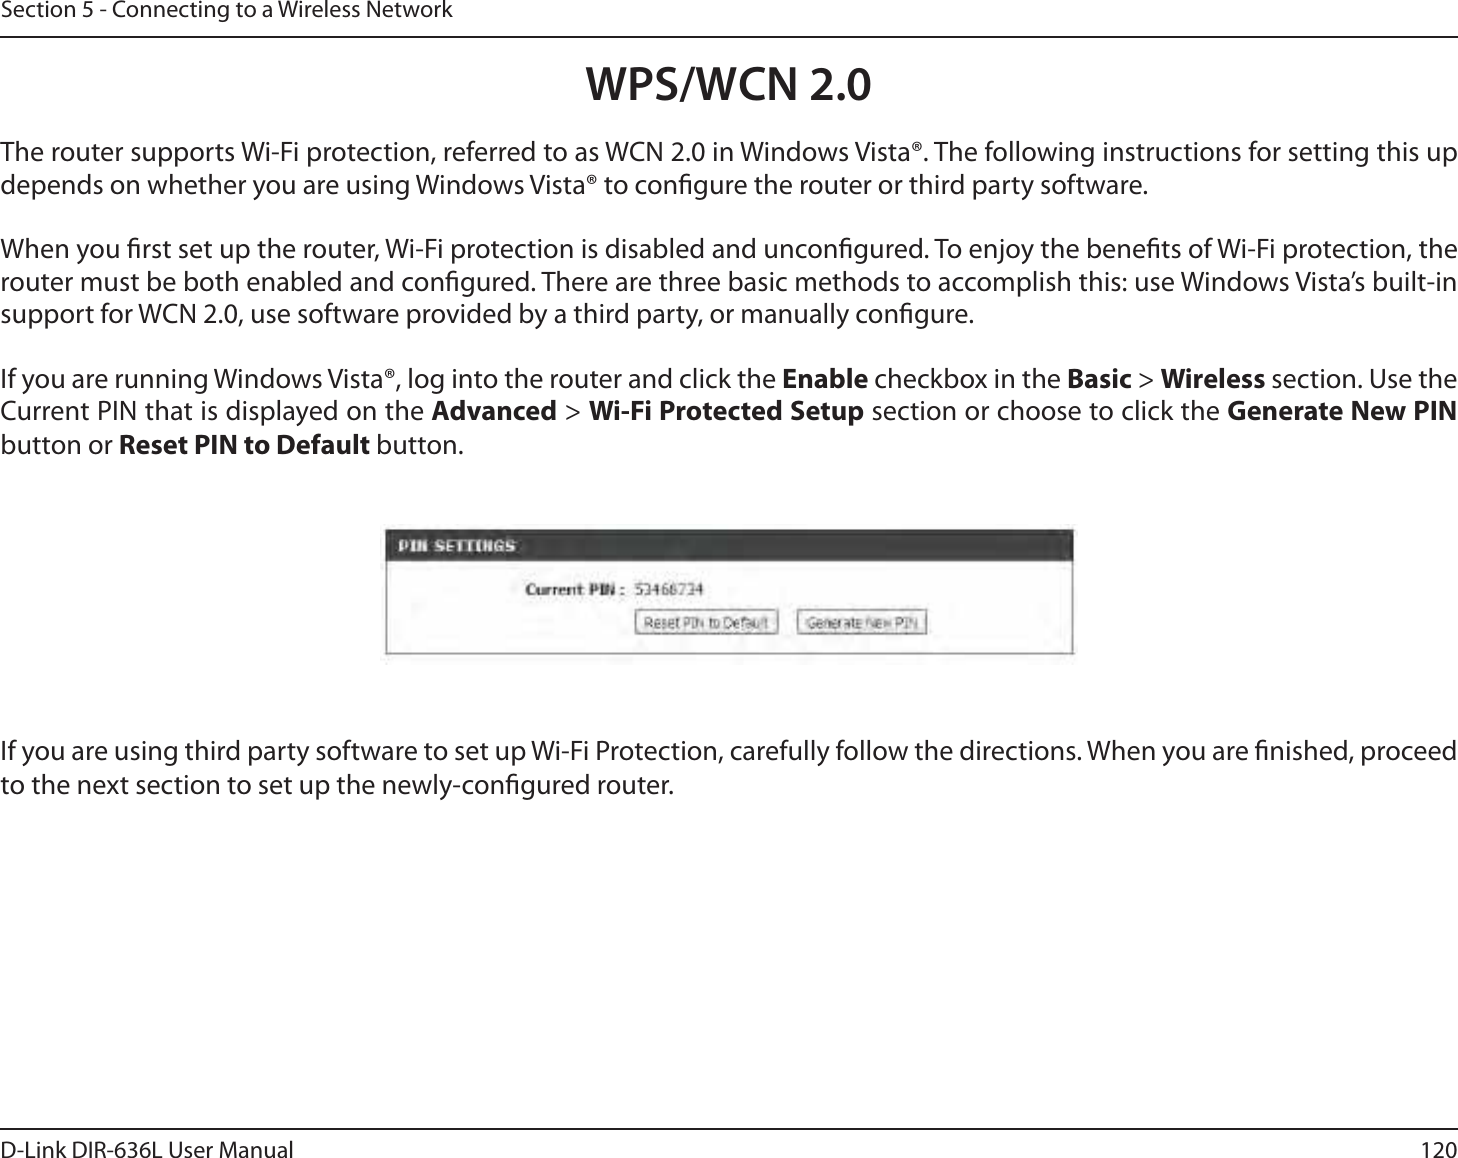 120D-Link DIR-636L User ManualSection 5 - Connecting to a Wireless NetworkWPS/WCN 2.0The router supports Wi-Fi protection, referred to as WCN 2.0 in Windows Vista®. The following instructions for setting this up depends on whether you are using Windows Vista® to congure the router or third party software.        When you rst set up the router, Wi-Fi protection is disabled and uncongured. To enjoy the benets of Wi-Fi protection, the router must be both enabled and congured. There are three basic methods to accomplish this: use Windows Vista’s built-in support for WCN 2.0, use software provided by a third party, or manually congure. If you are running Windows Vista®, log into the router and click the Enable checkbox in the Basic &gt; Wireless section. Use the Current PIN that is displayed on the Advanced &gt; Wi-Fi Protected Setup section or choose to click the Generate New PIN button or Reset PIN to Default button. If you are using third party software to set up Wi-Fi Protection, carefully follow the directions. When you are nished, proceed to the next section to set up the newly-congured router. 